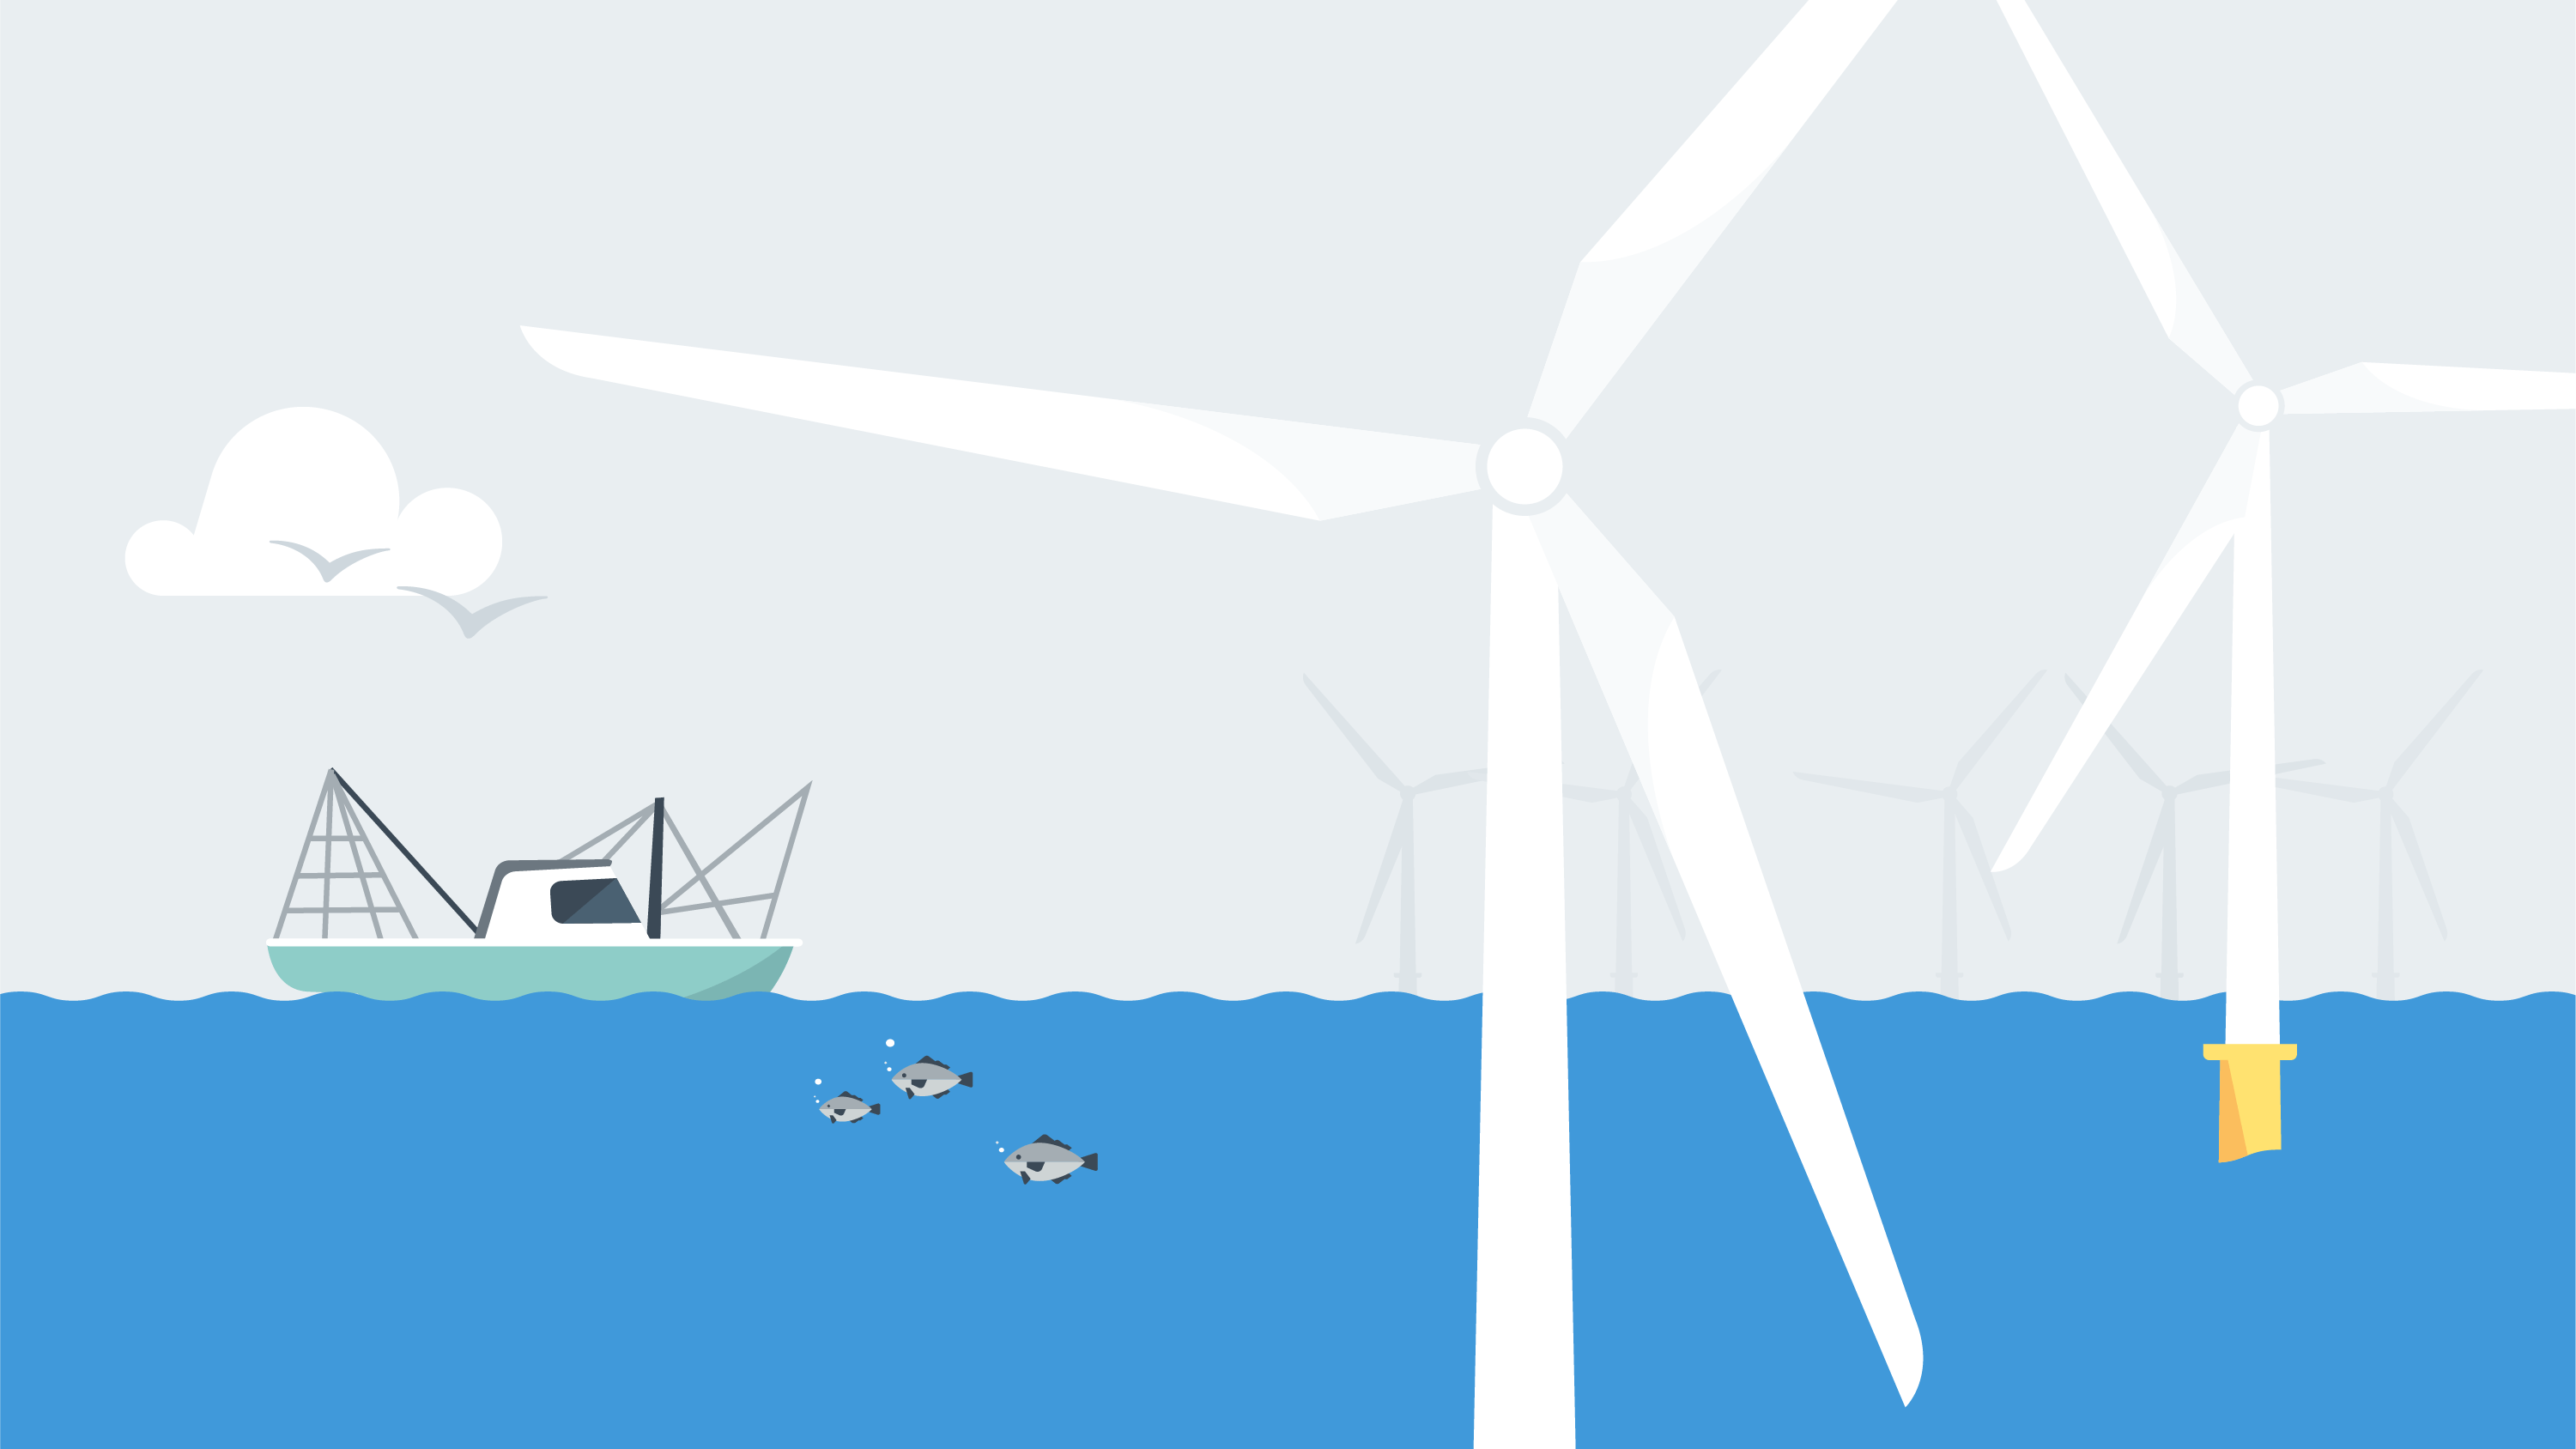 Can offshore wind and commercial fishing coexist?